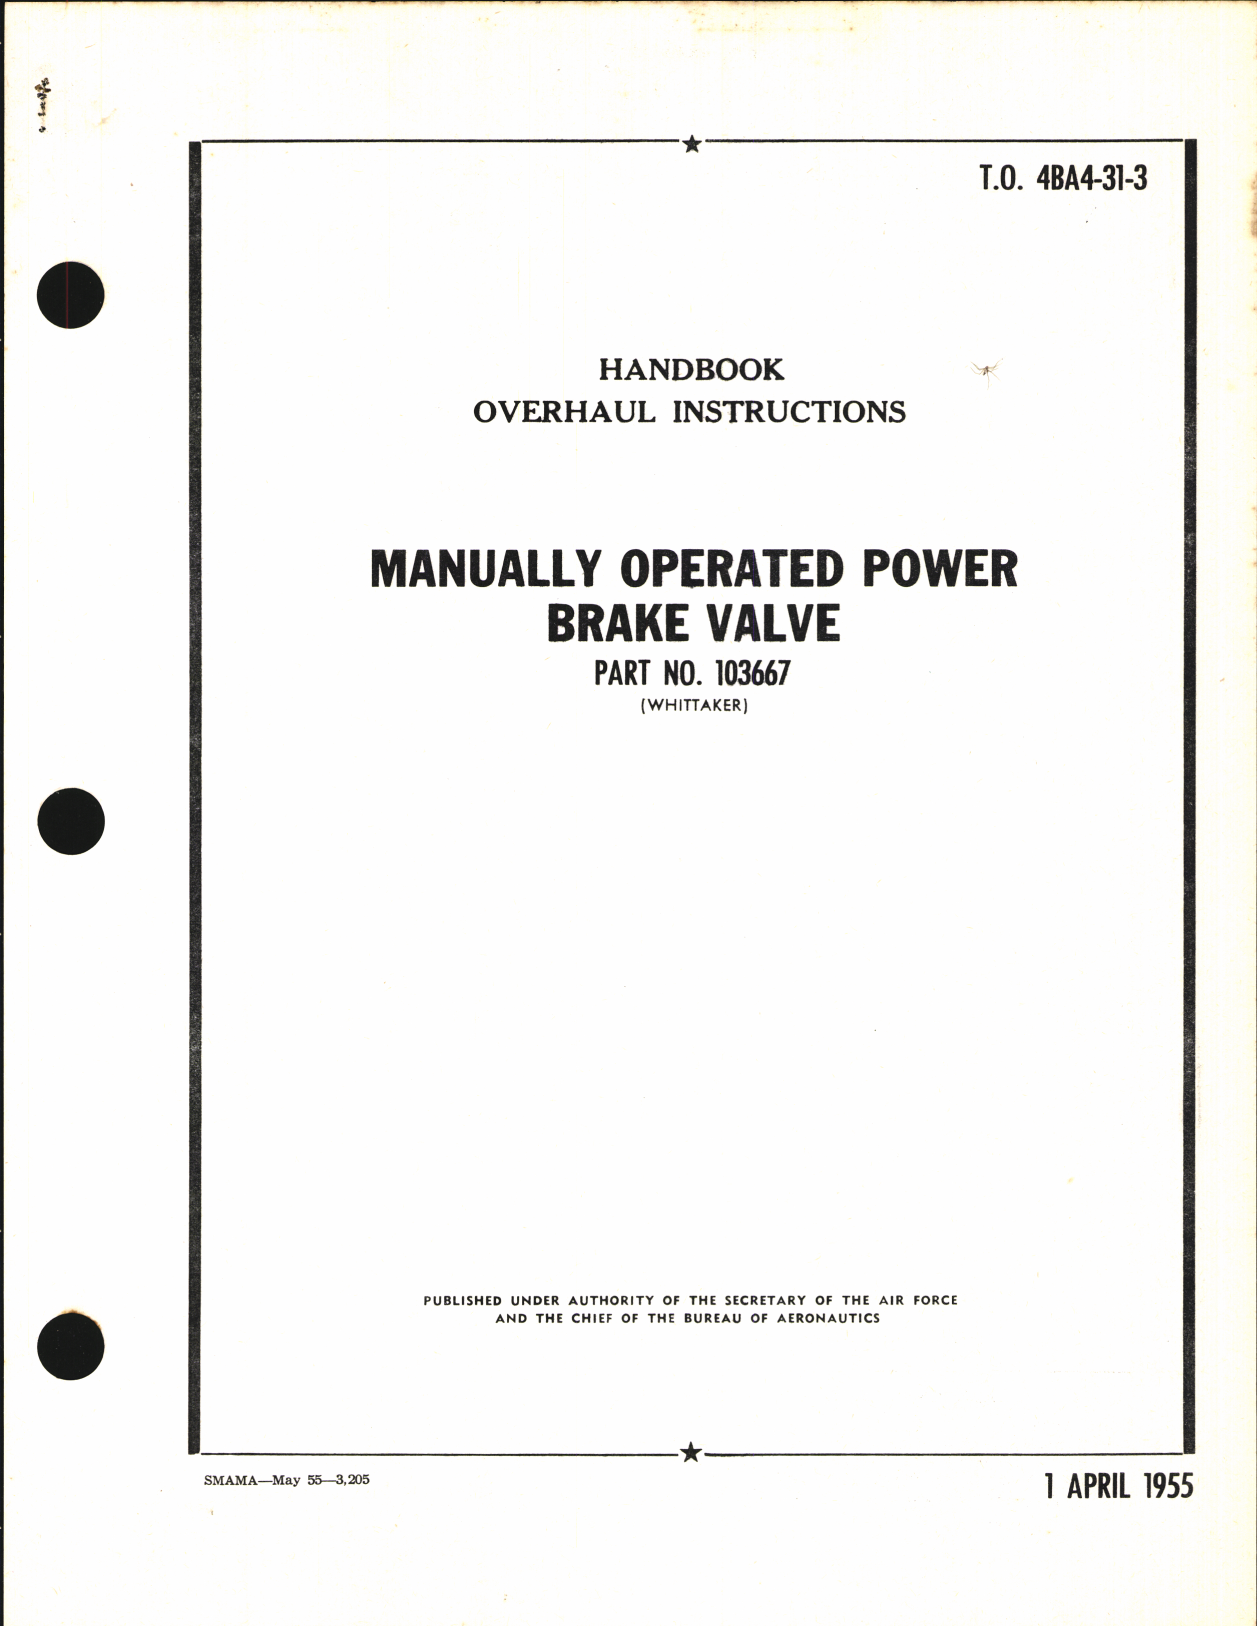 Sample page 1 from AirCorps Library document: Overhaul Instructions for Manually Operated Power Brake Valve